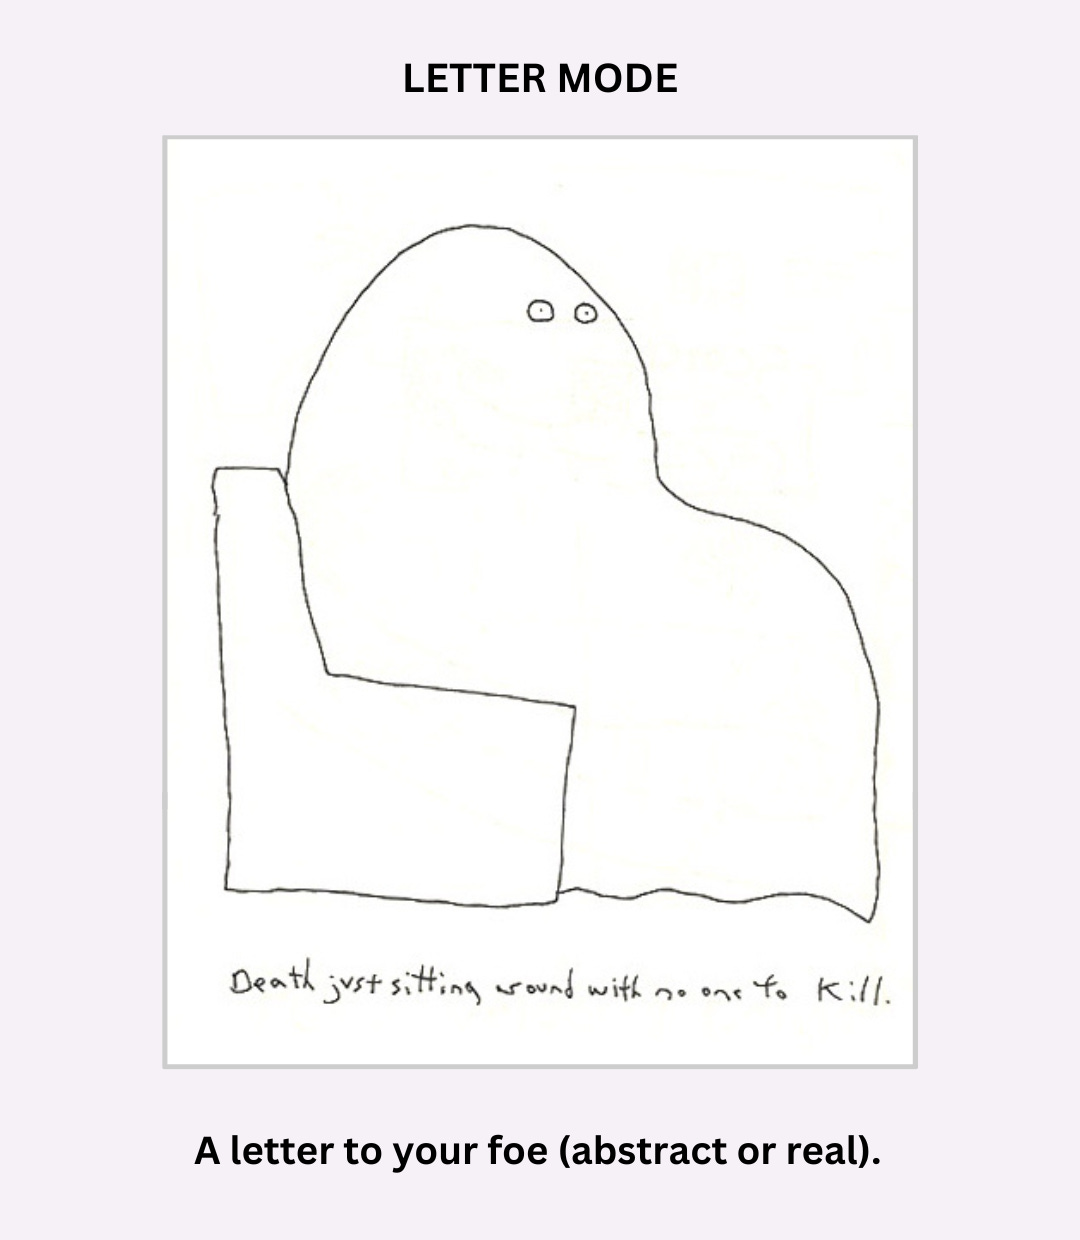 Text reads: "Letter mode. A letter to your foe (abstract or real)." The image is a simple drawing of a blob with eyes sitting in a chair. Under the drawing is a handwritten caption that says "Death just sitting around with no one to kill."